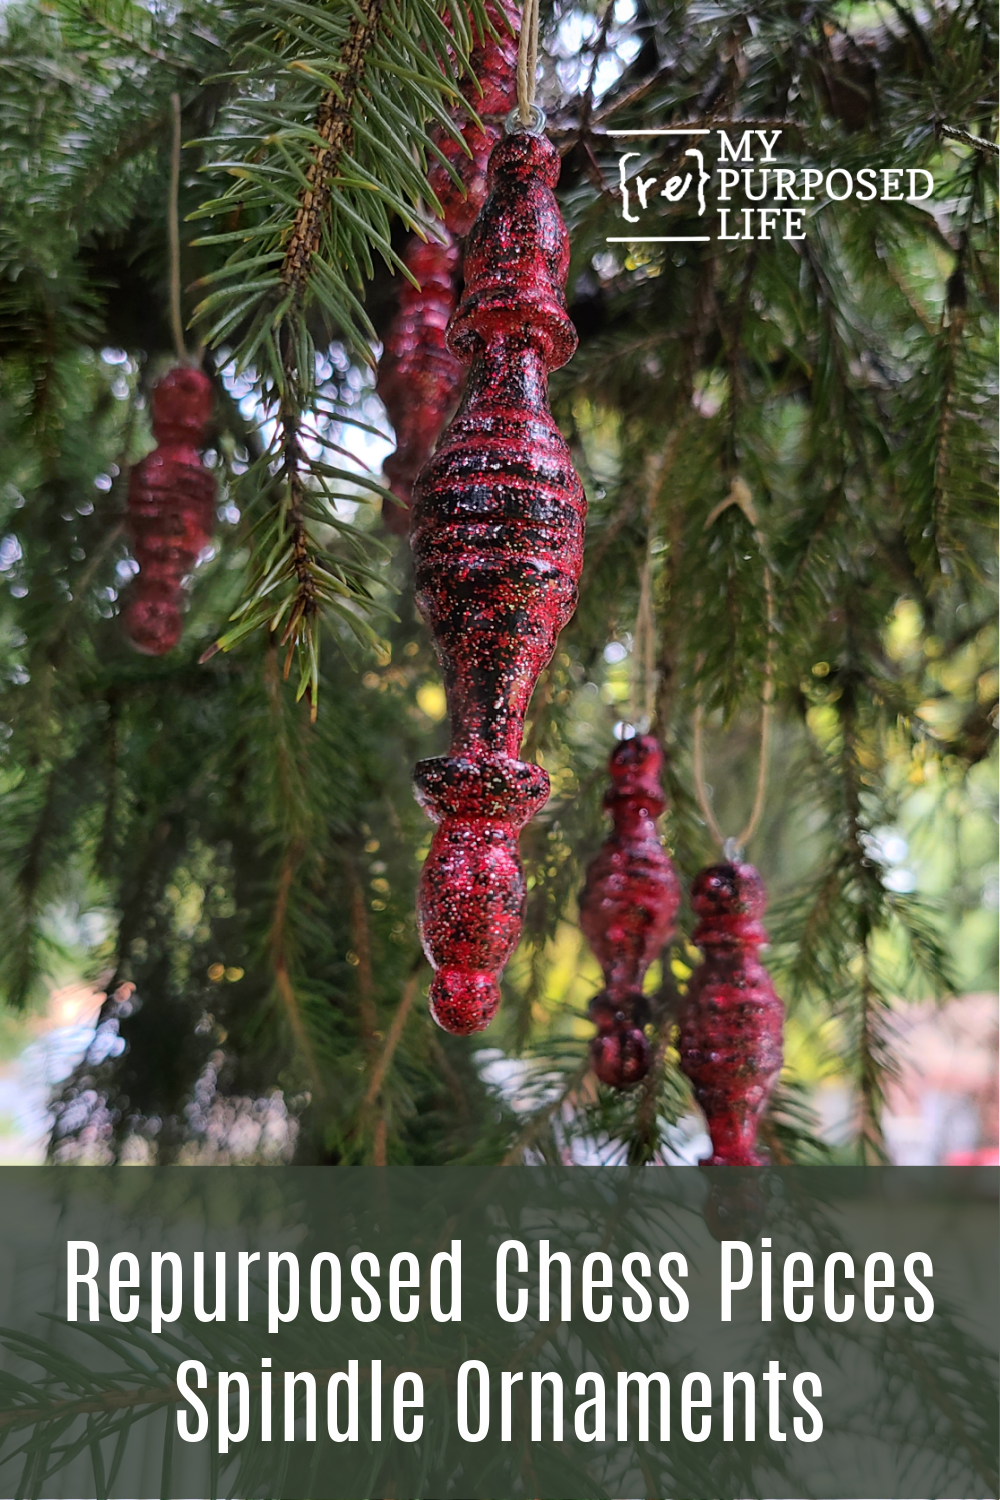 How to make spindle ornaments for Christmas out of repurposed wooden chess pieces. This easy project can be completed in just a couple of hours. #MyRepurposedLife #repurposed #chesspieces #Christmas #ornaments #spindles via @repurposedlife